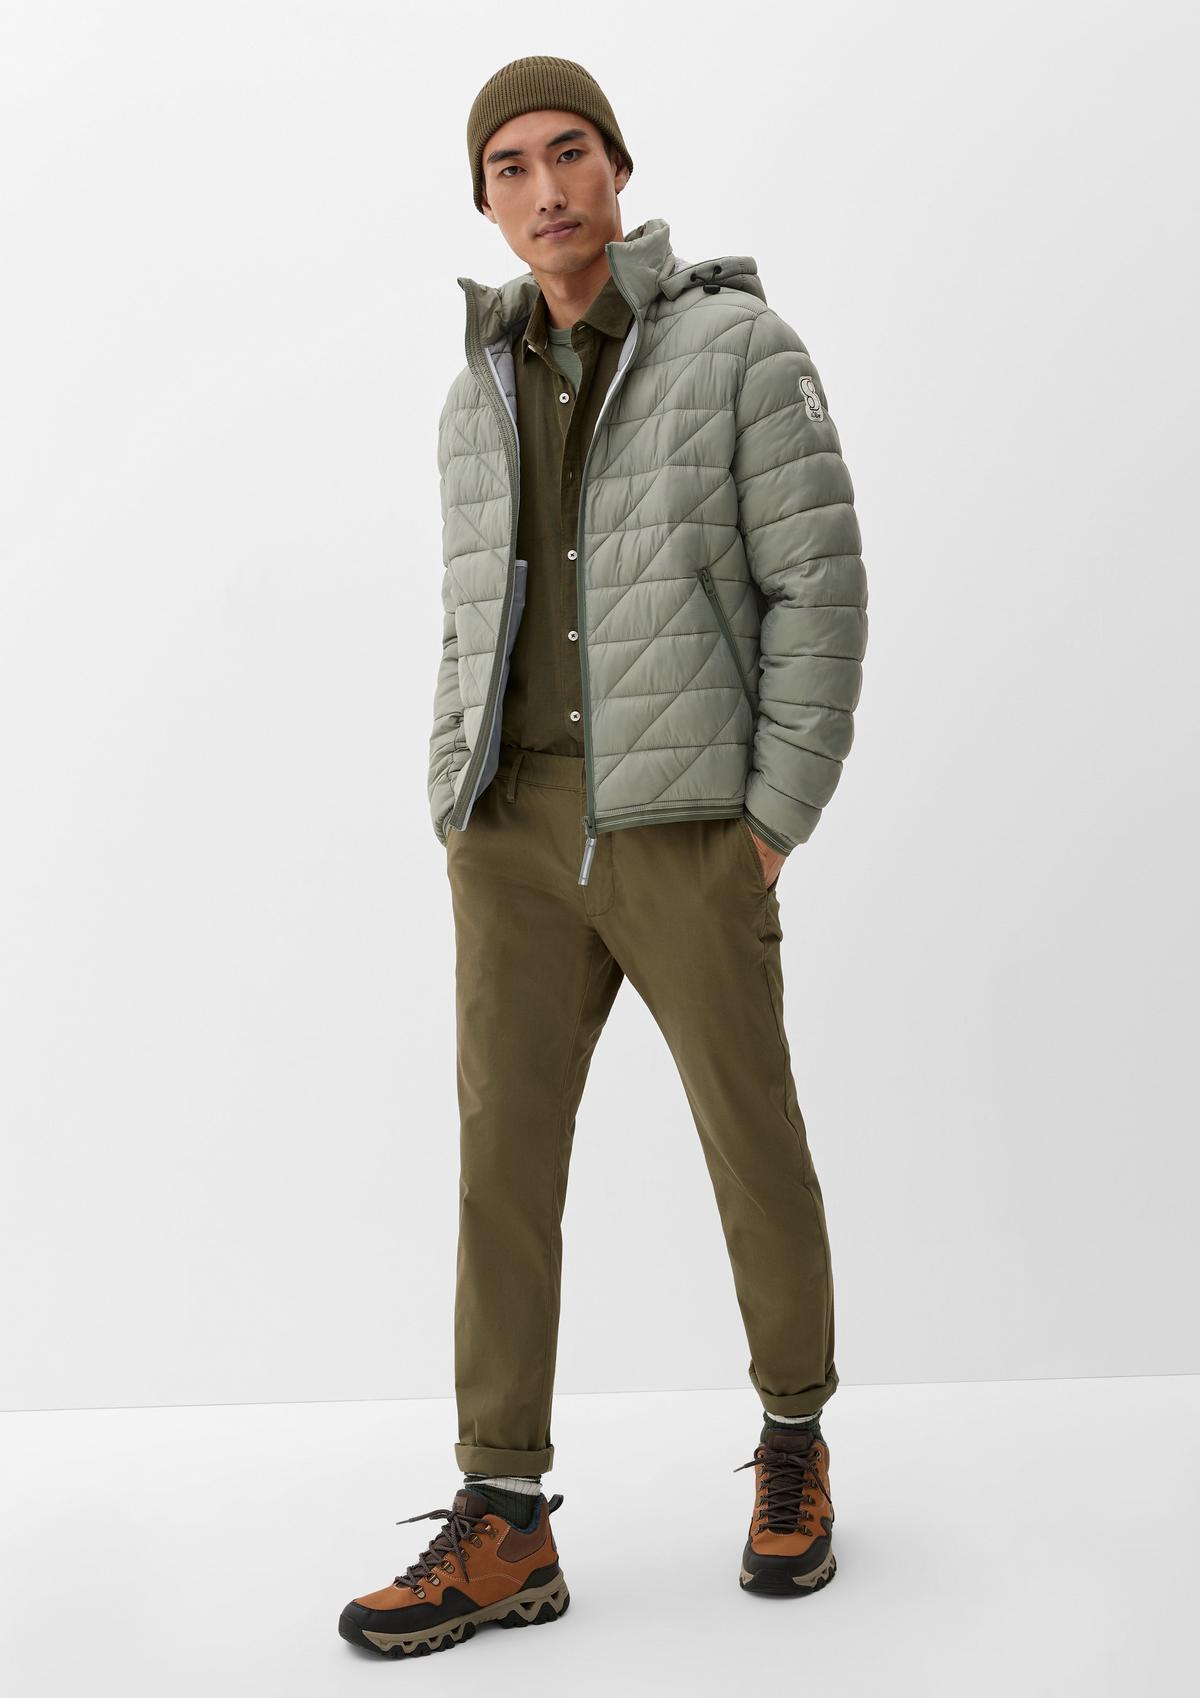 Quilted jacket with a detachable hood